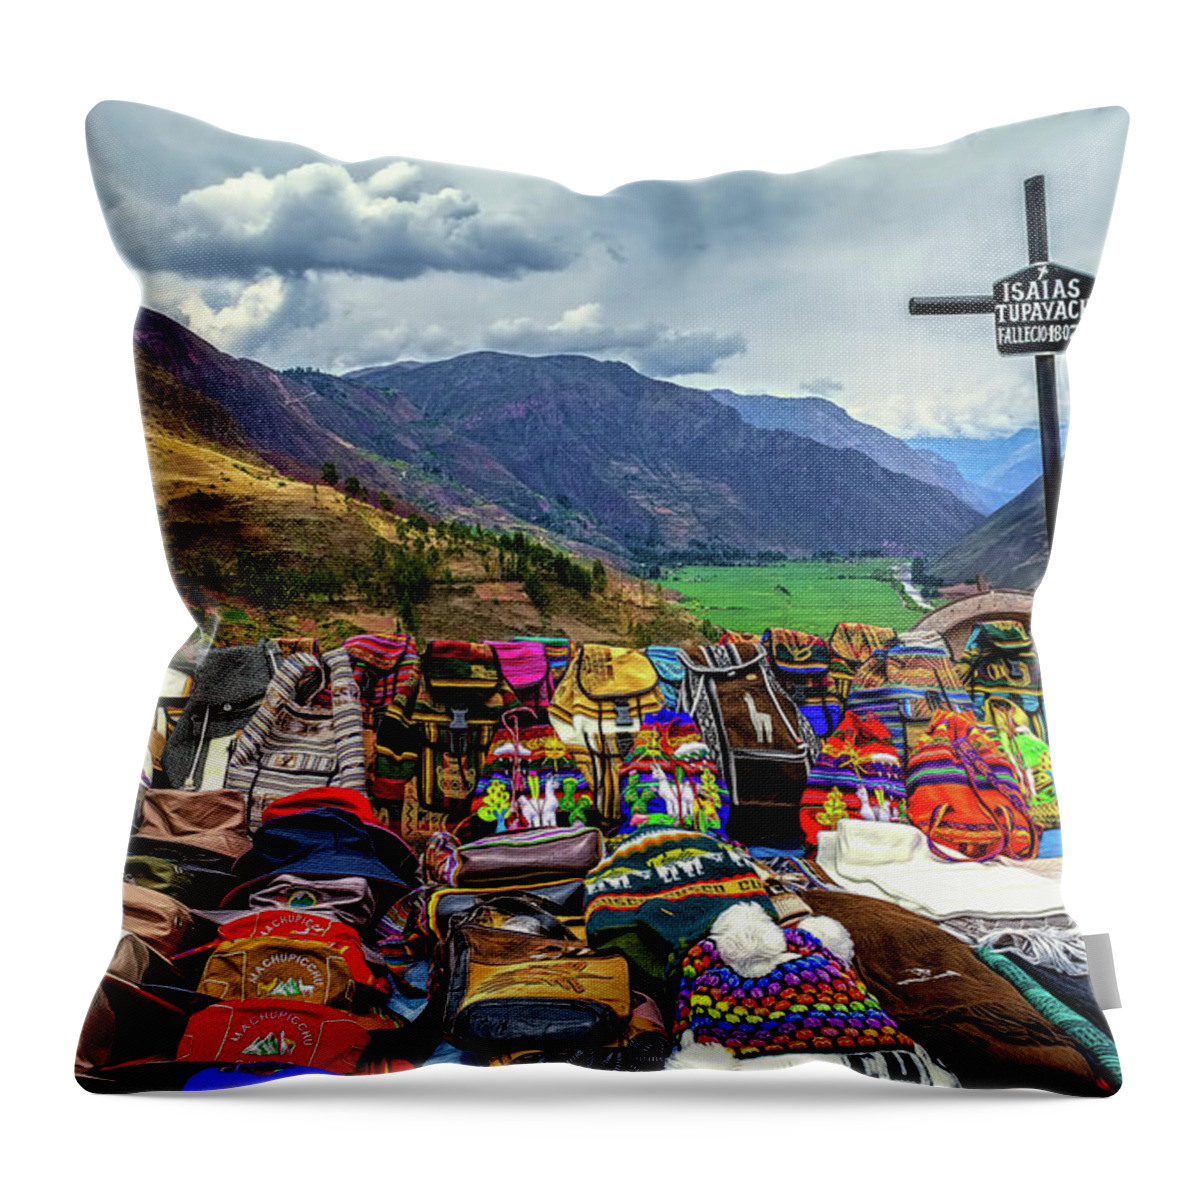 America Throw Pillow featuring the photograph Isaias Tupayachi by Maria Coulson